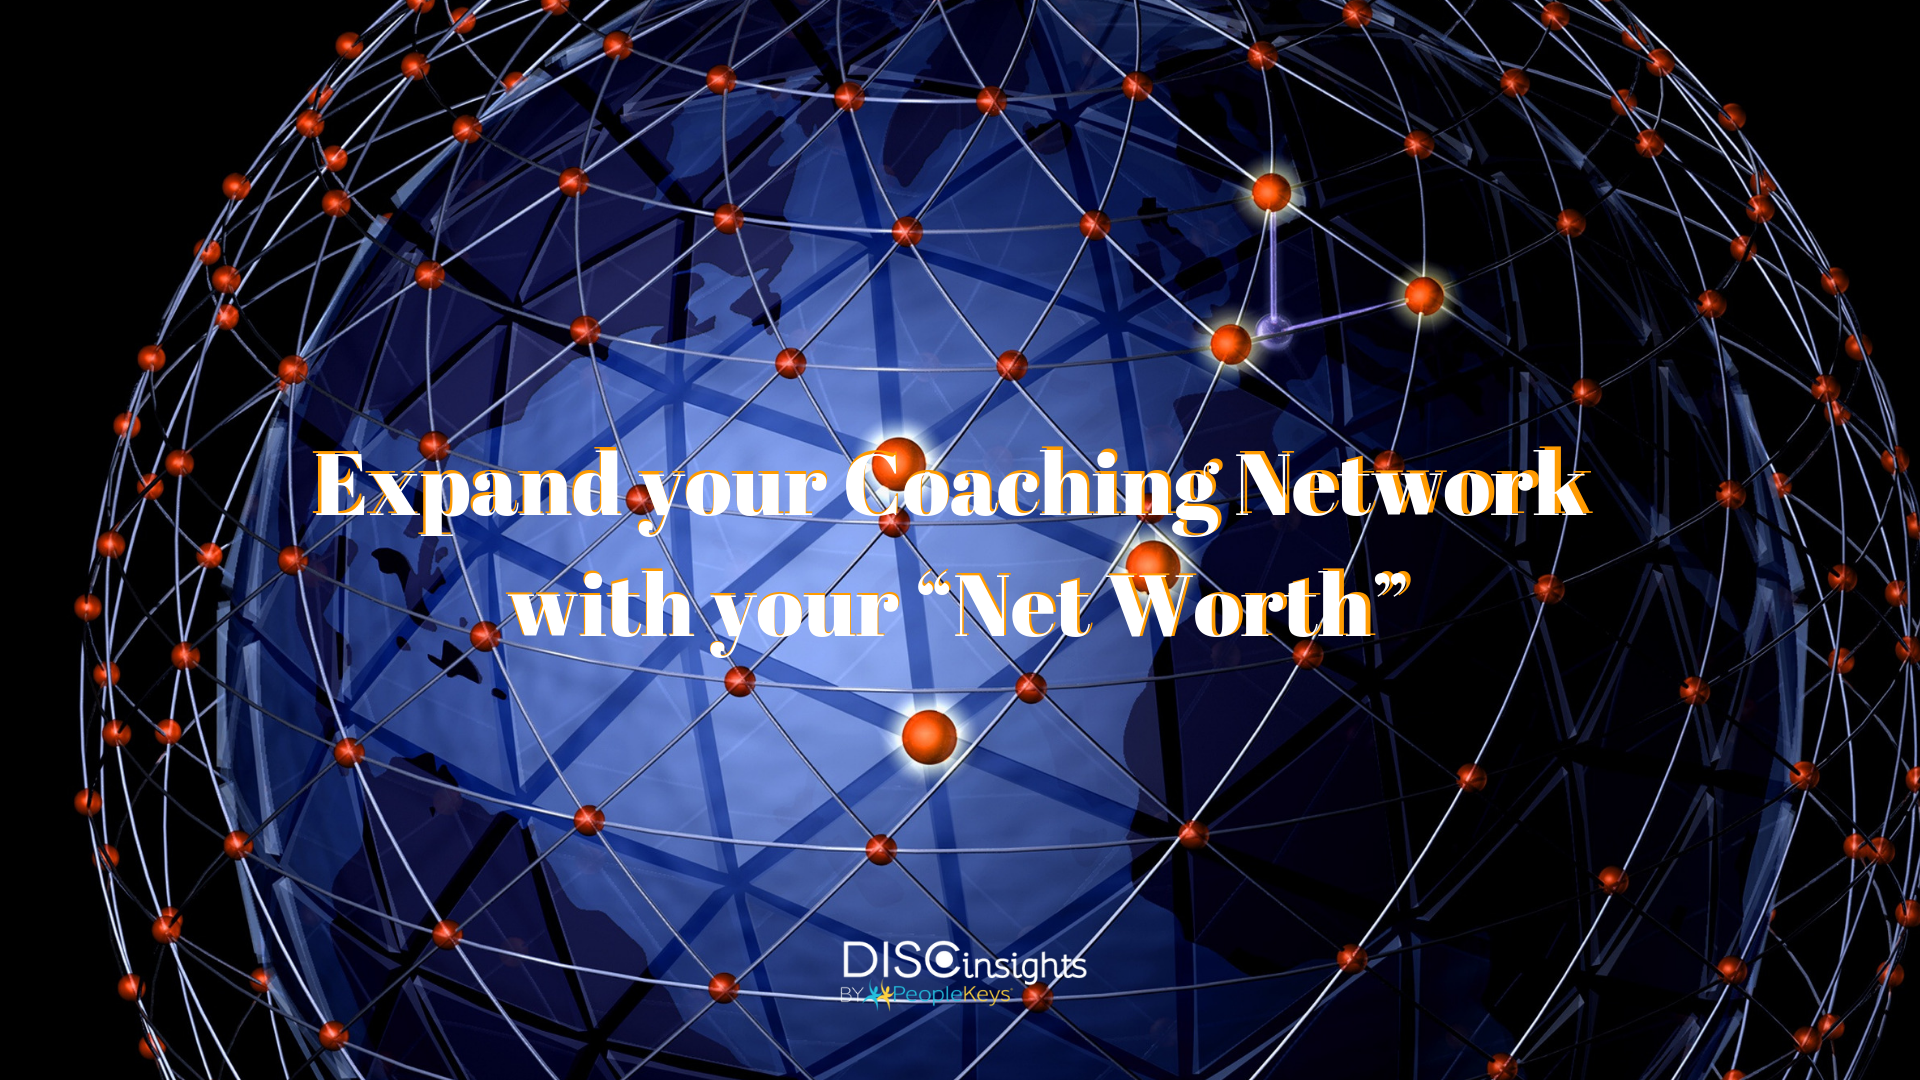 Expand your Coaching Network with your “Net Worth”